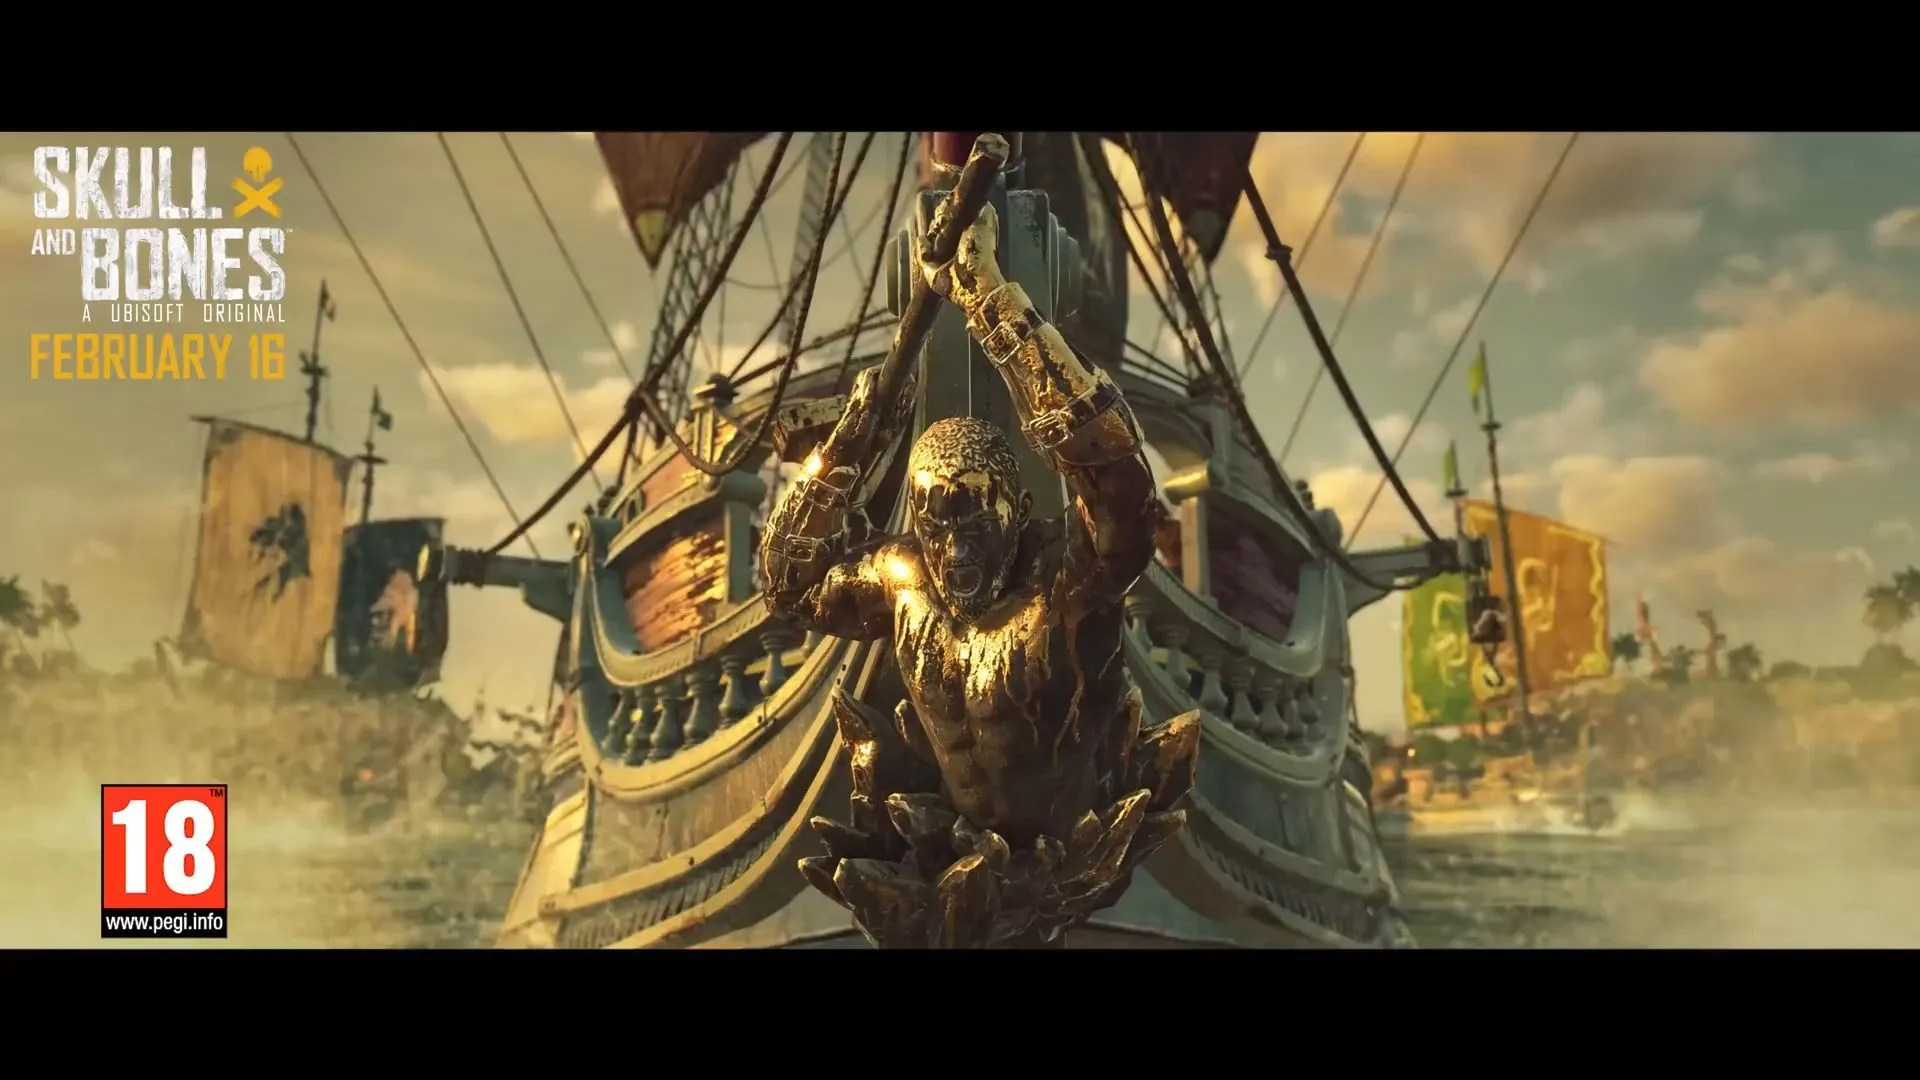 Skull and Bones has actually made it to the store shelves - Launch Trailer